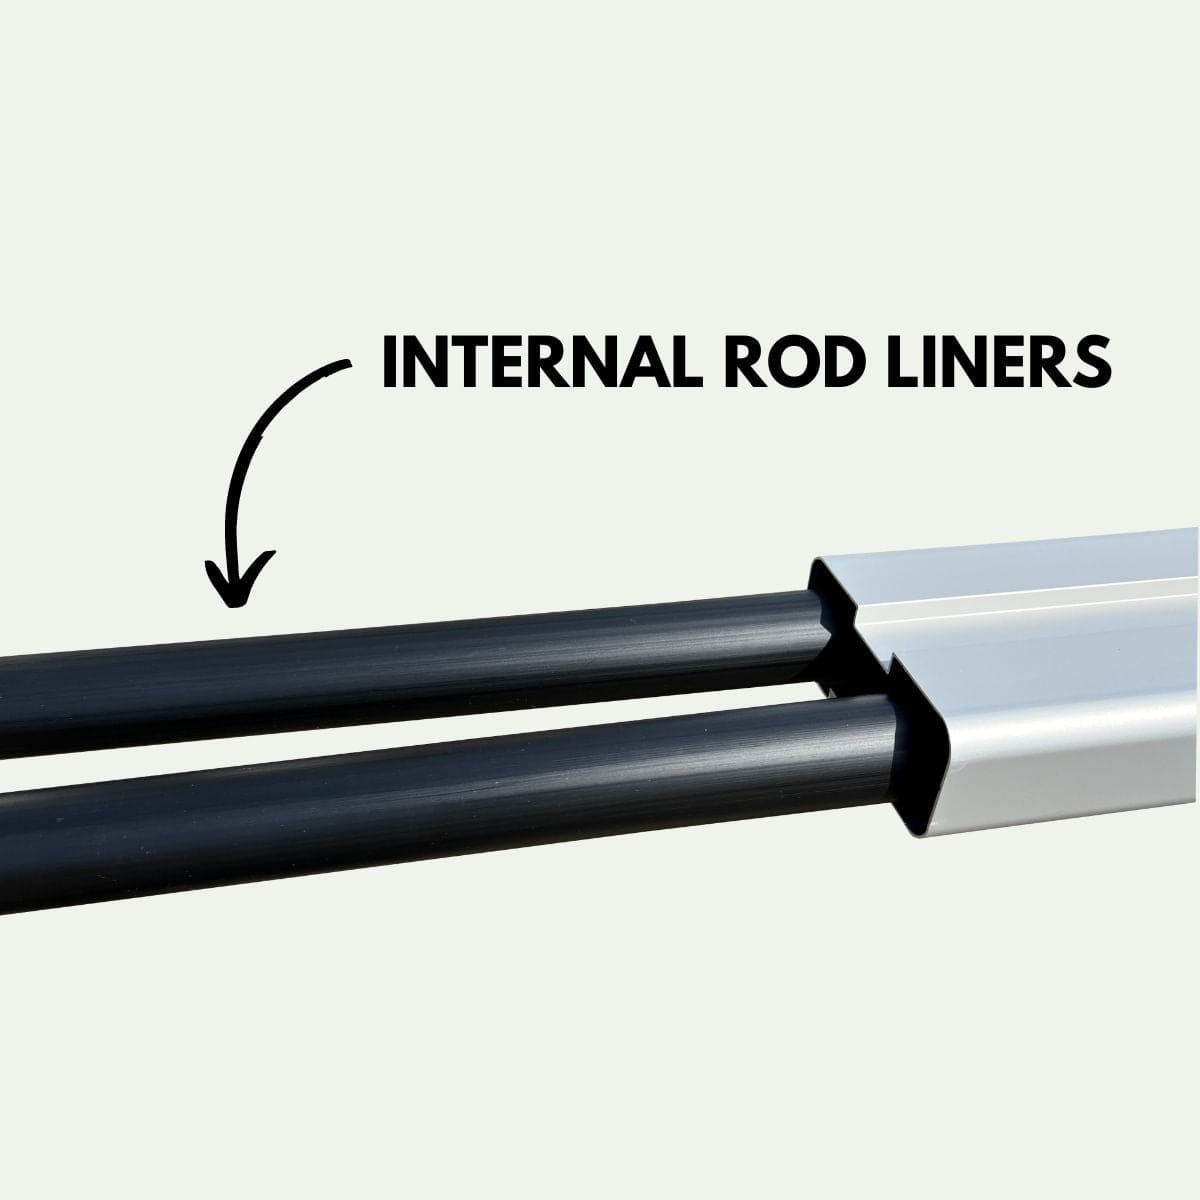 Rod-Runner Pro  Fishing Rod Carrier - Gray.Introducing the latest